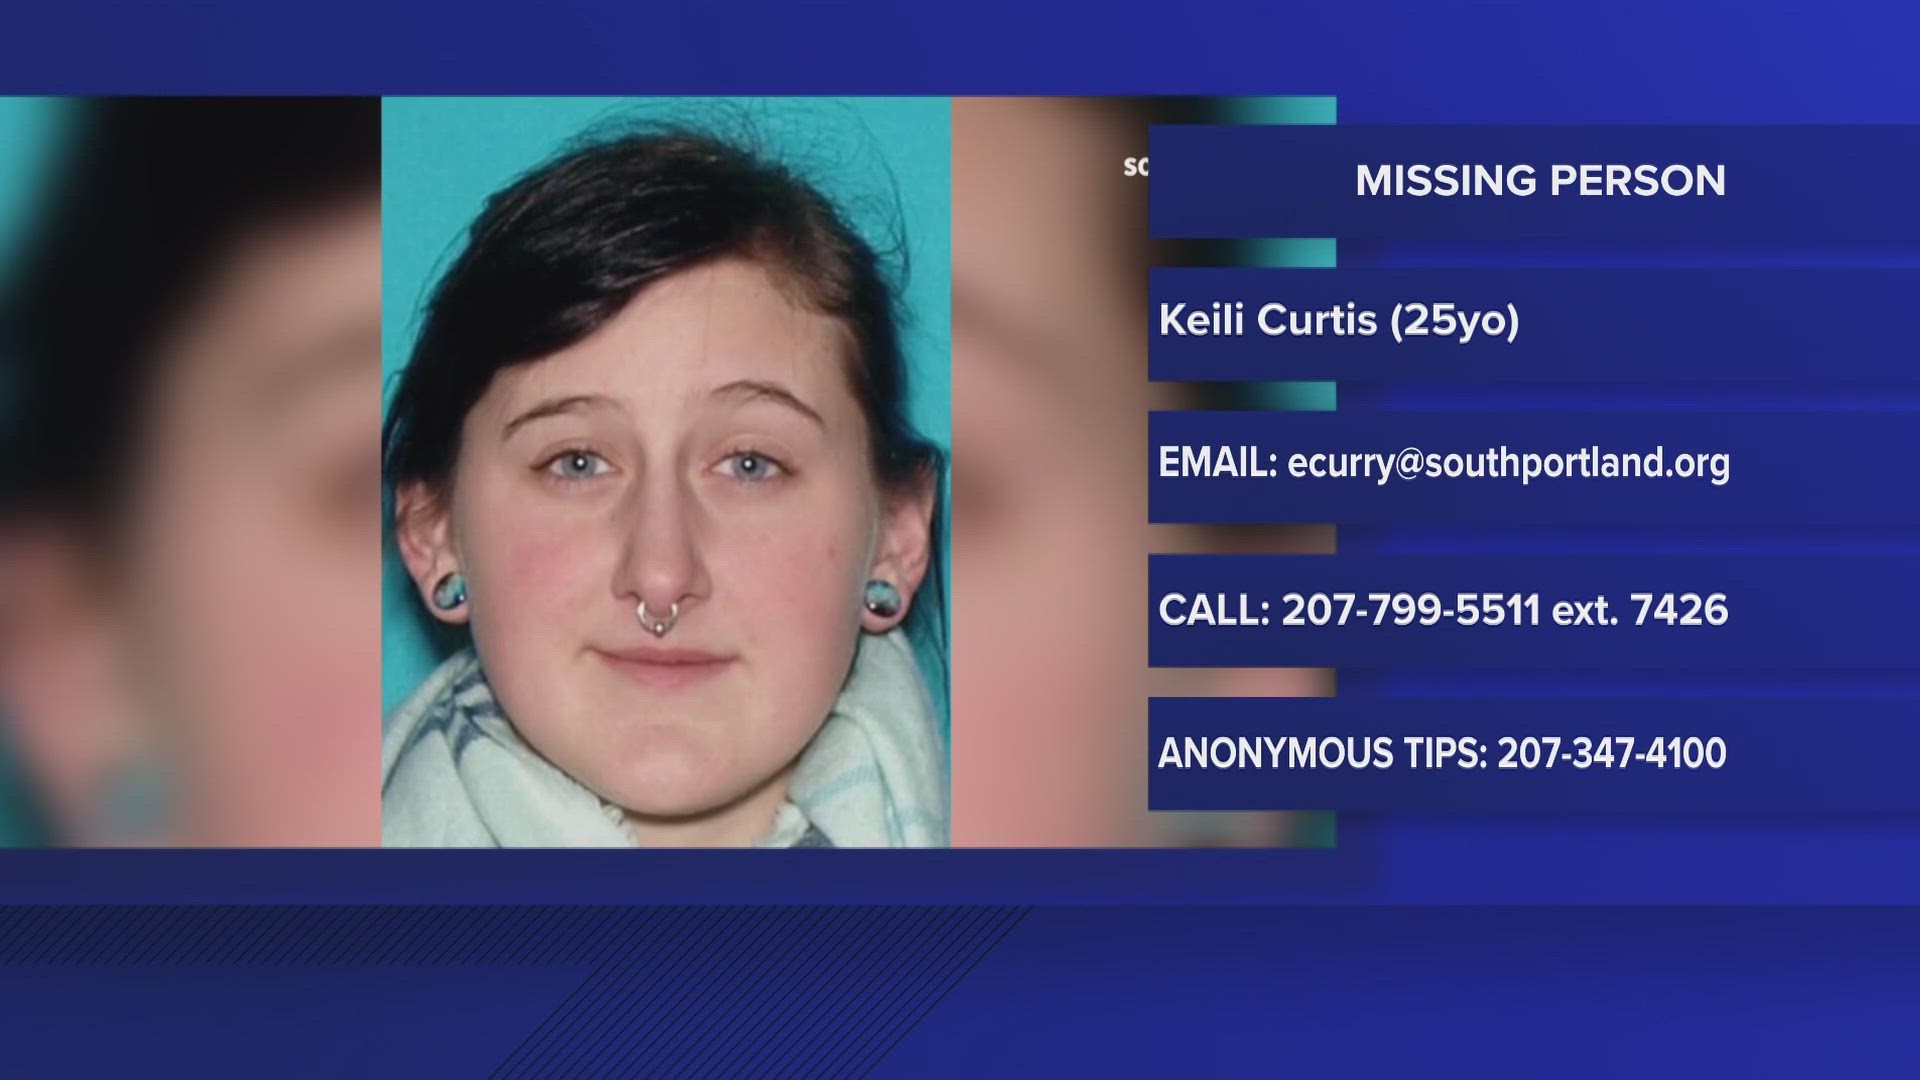 Police said Friday night 25-year-old Keili Curtis has been reported missing.